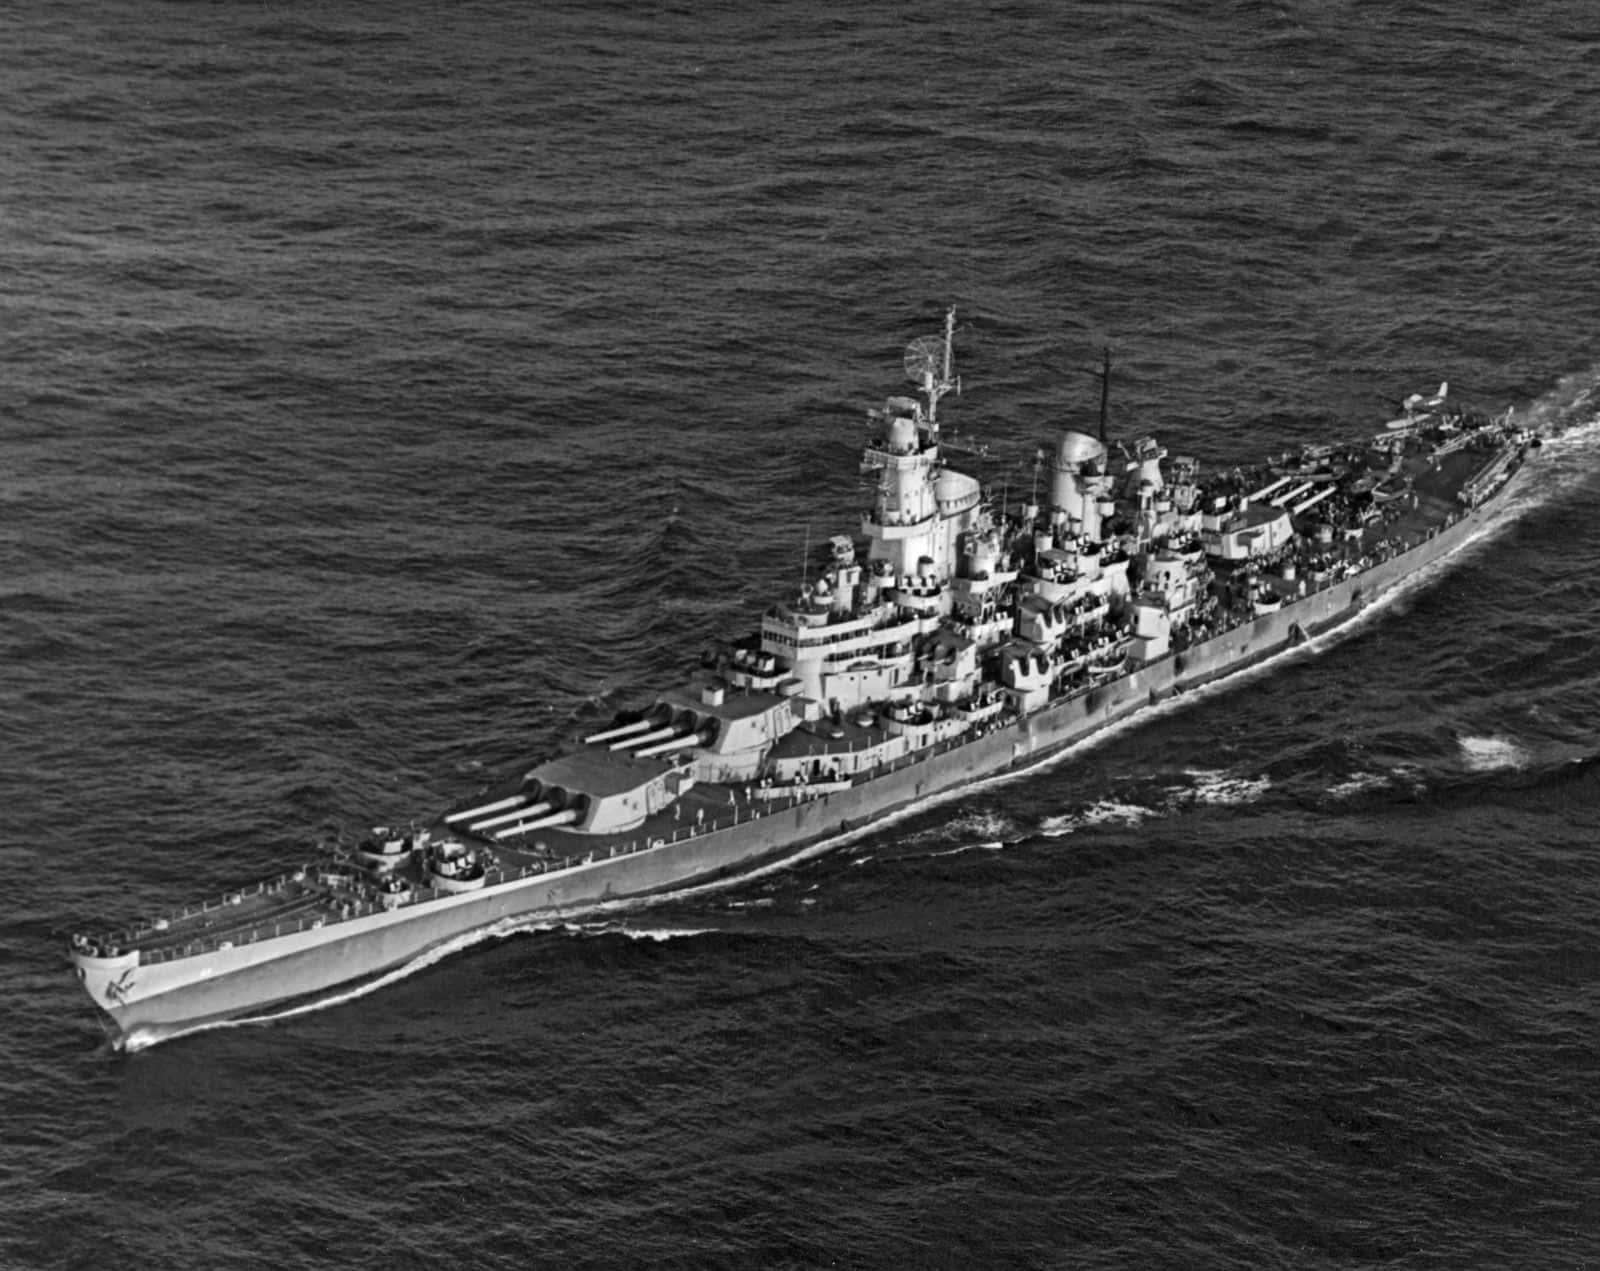 A Black And White Photo Of A Large Battleship